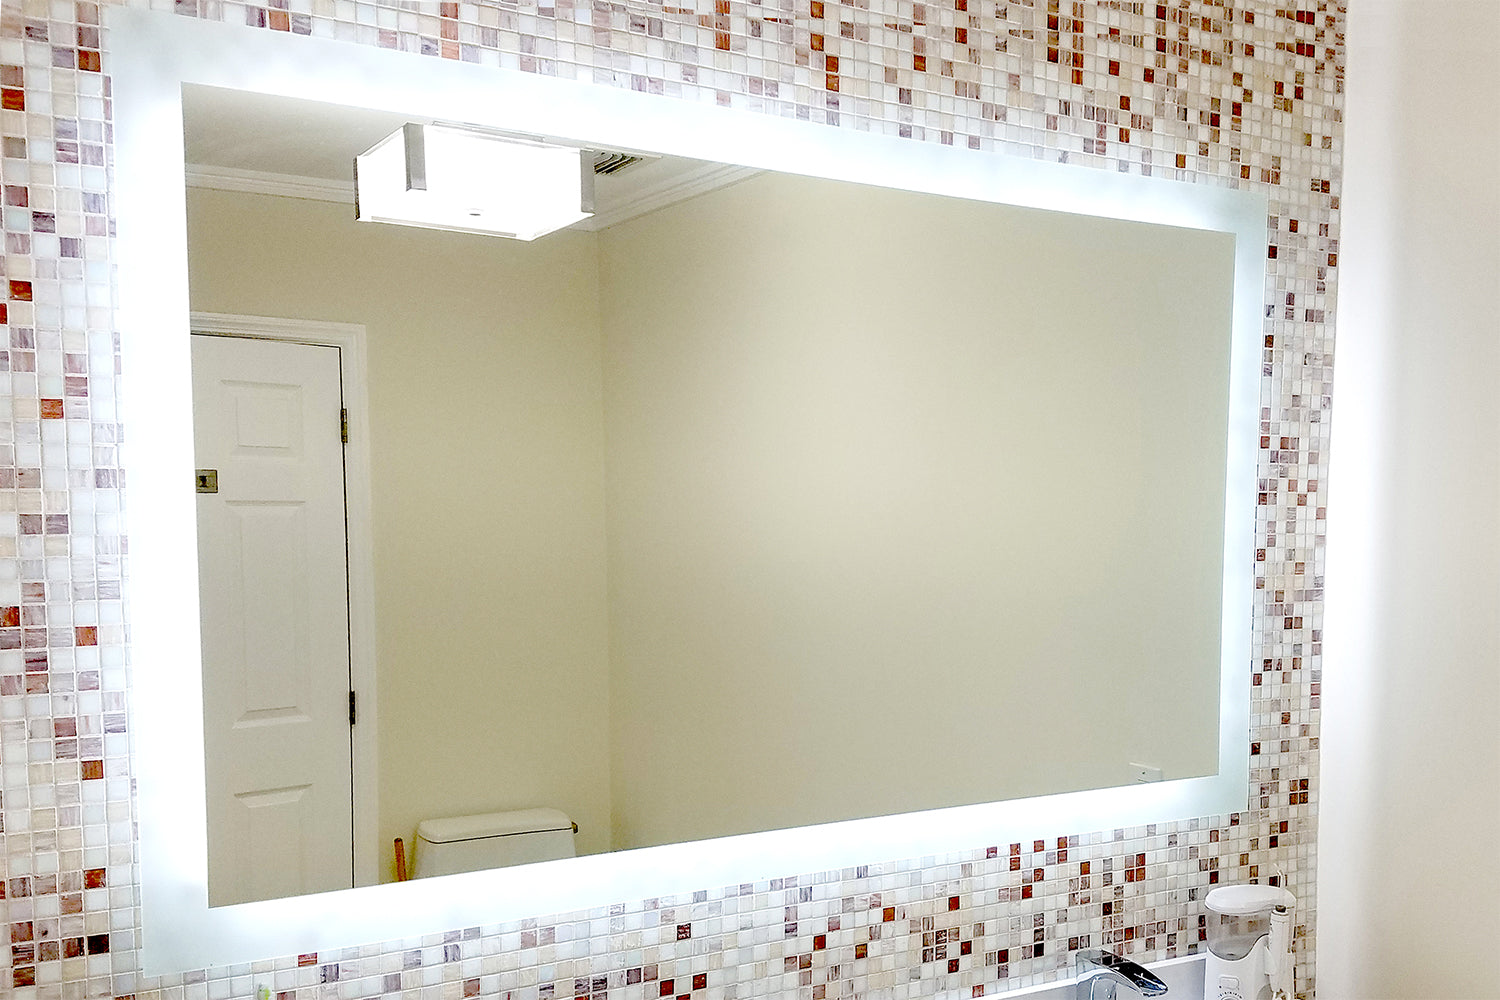 LED Mirror (Side-Lighted) 54" x 36"